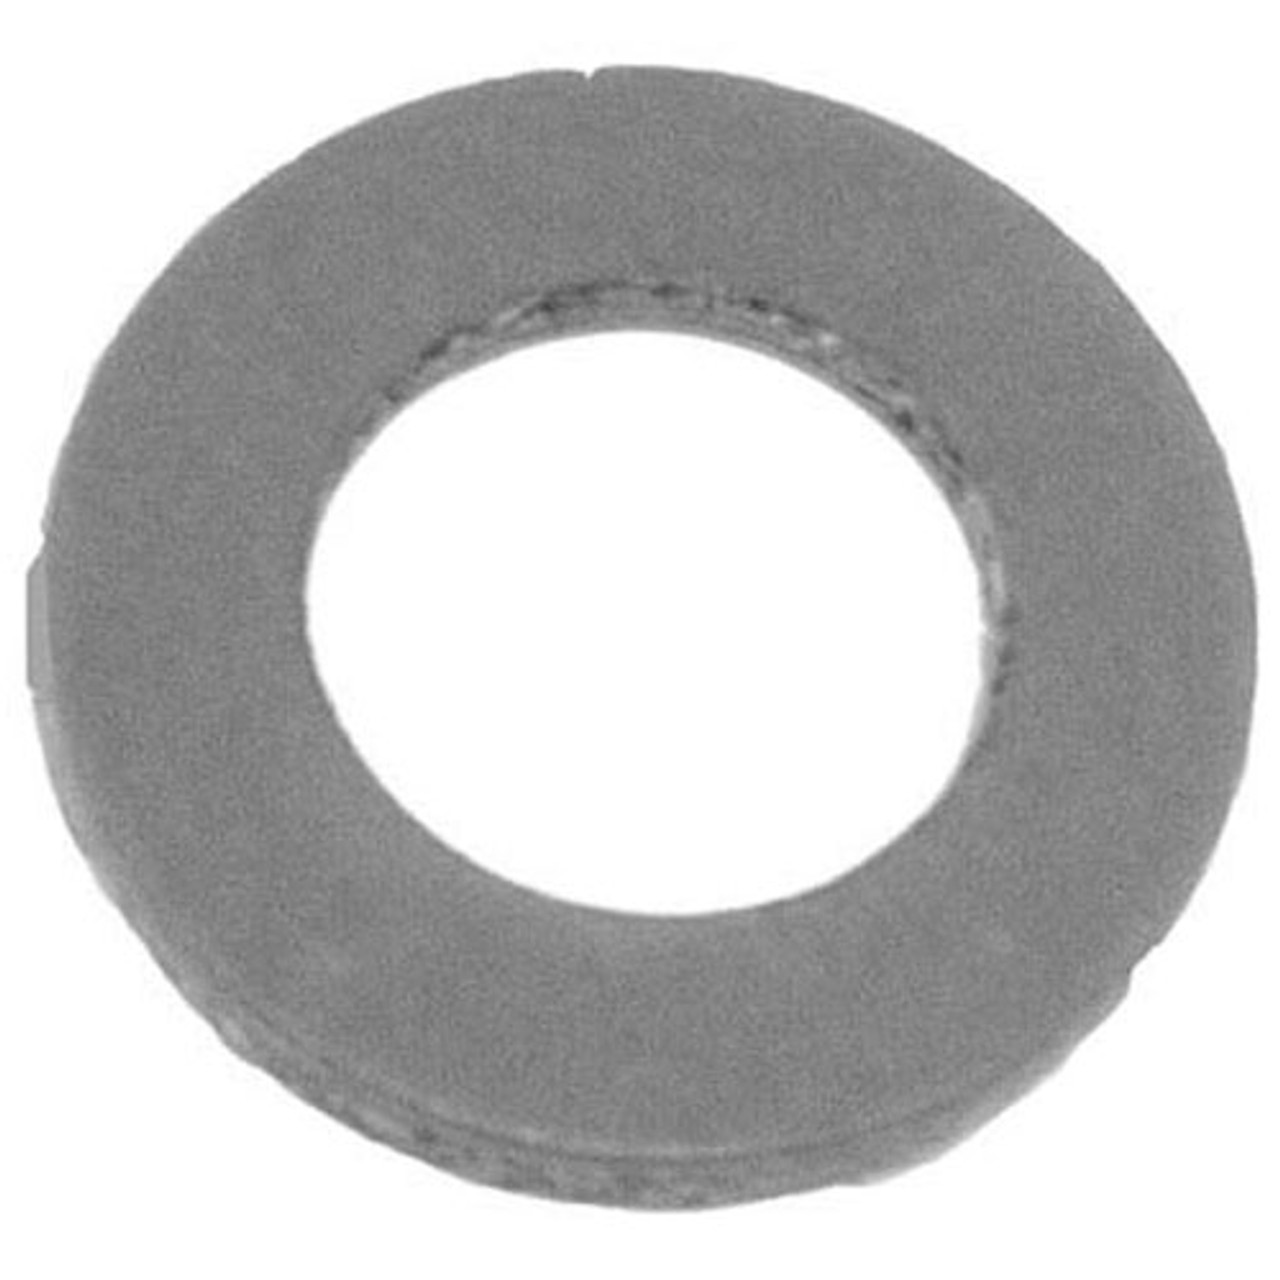 Fibre Washer, Size 12 Fibre Washer, Size 12 - Replacement Part For Intedge 721